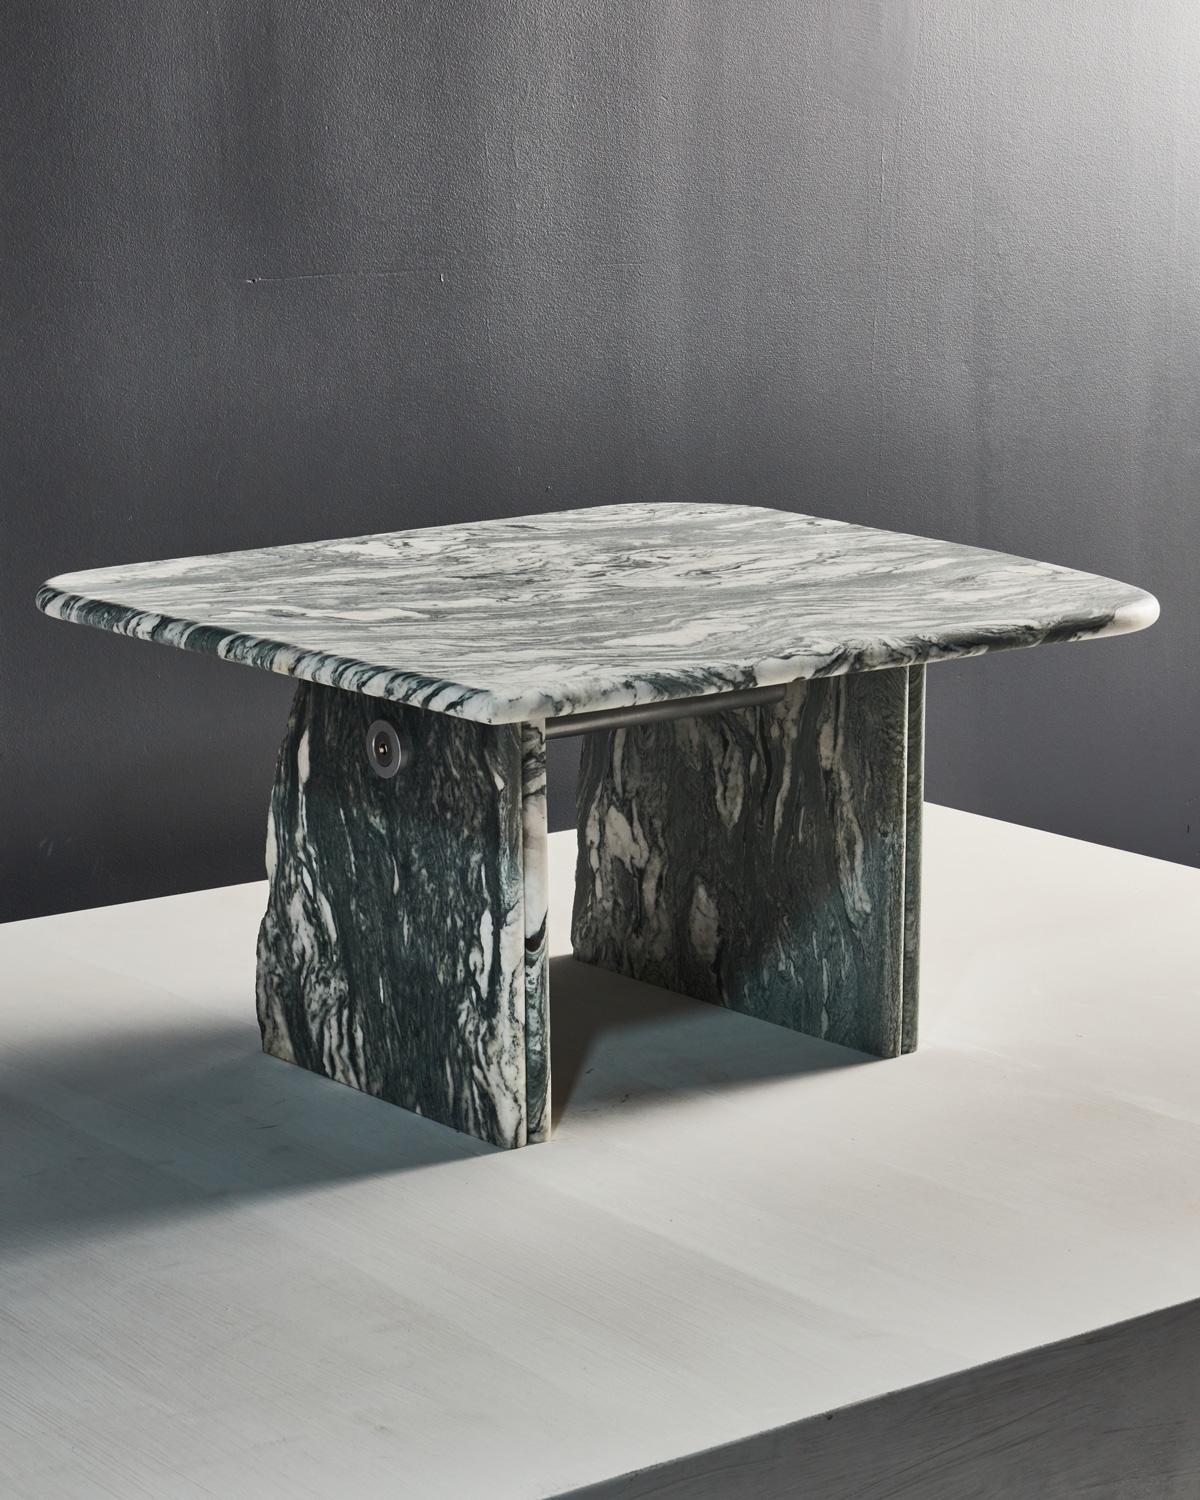 Each Lino table is a one-of-a-kind piece that celebrates the beauty in imperfection. Crafted from Cipollino marble, quarried from the Apuan Alps in northern Italy, its distinctive design highlights a natural fracture in the stone. Artfully